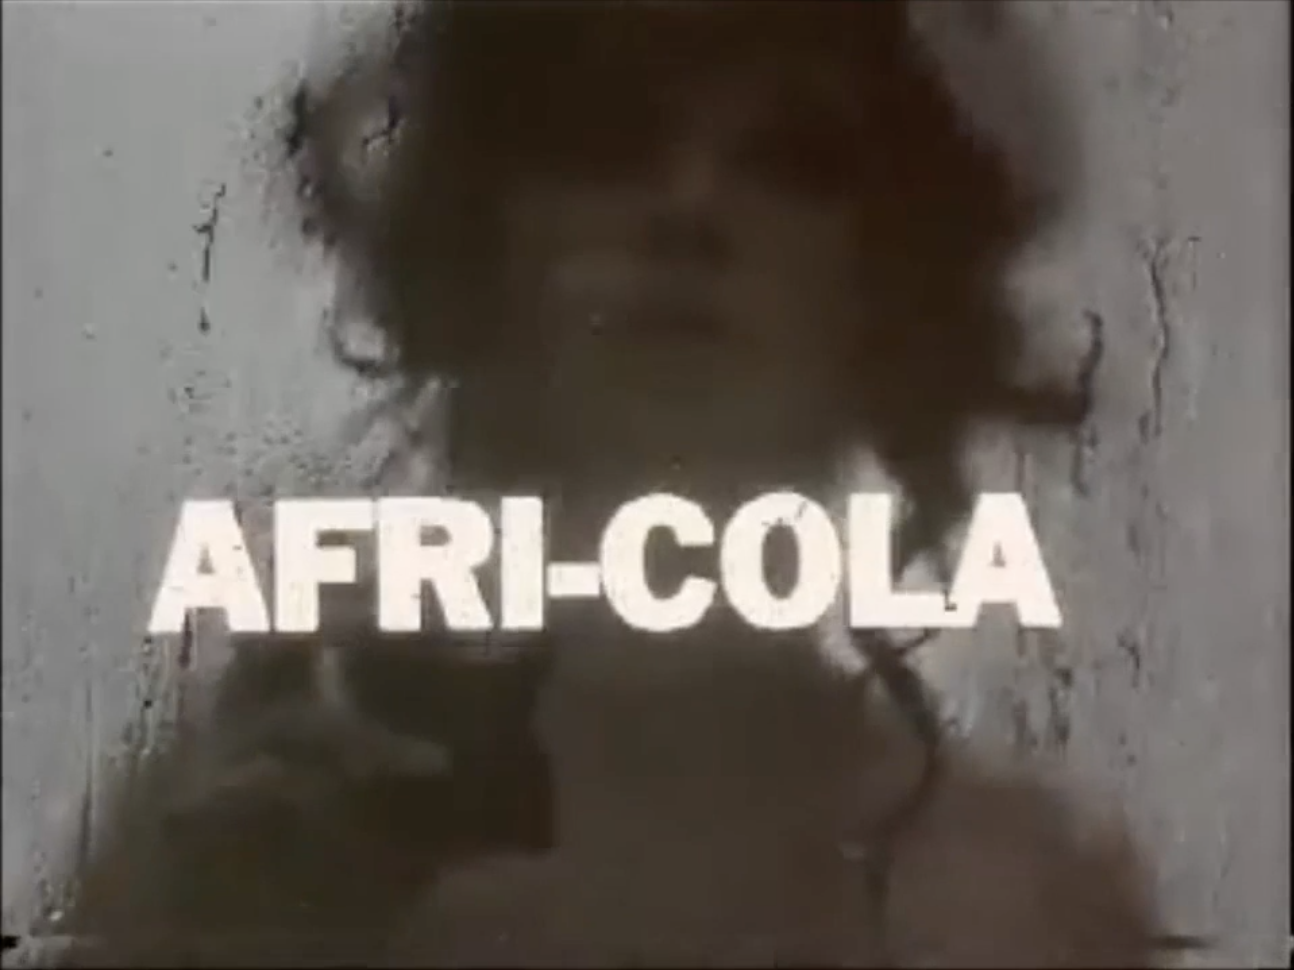 "AFRI-COLA" in all caps in front of a water-streaked window, behind which is the silhouette of a woman.